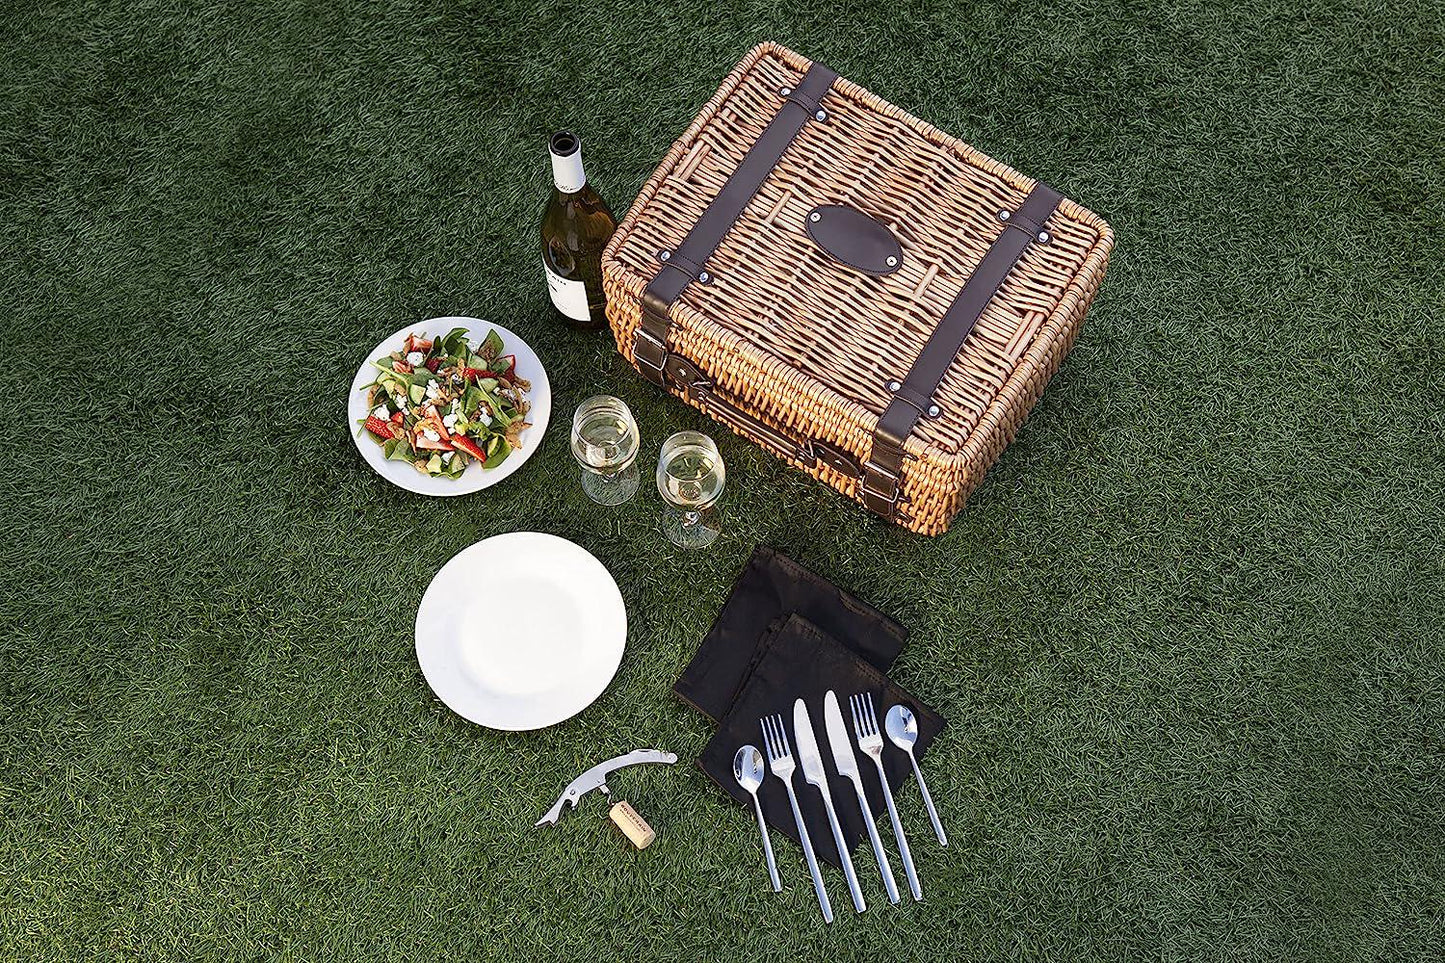 PICNIC TIME Champion Picnic Basket for 2, Large Wicker Hamper Set with Cutlery Service Kit (Black with Brown Accents)